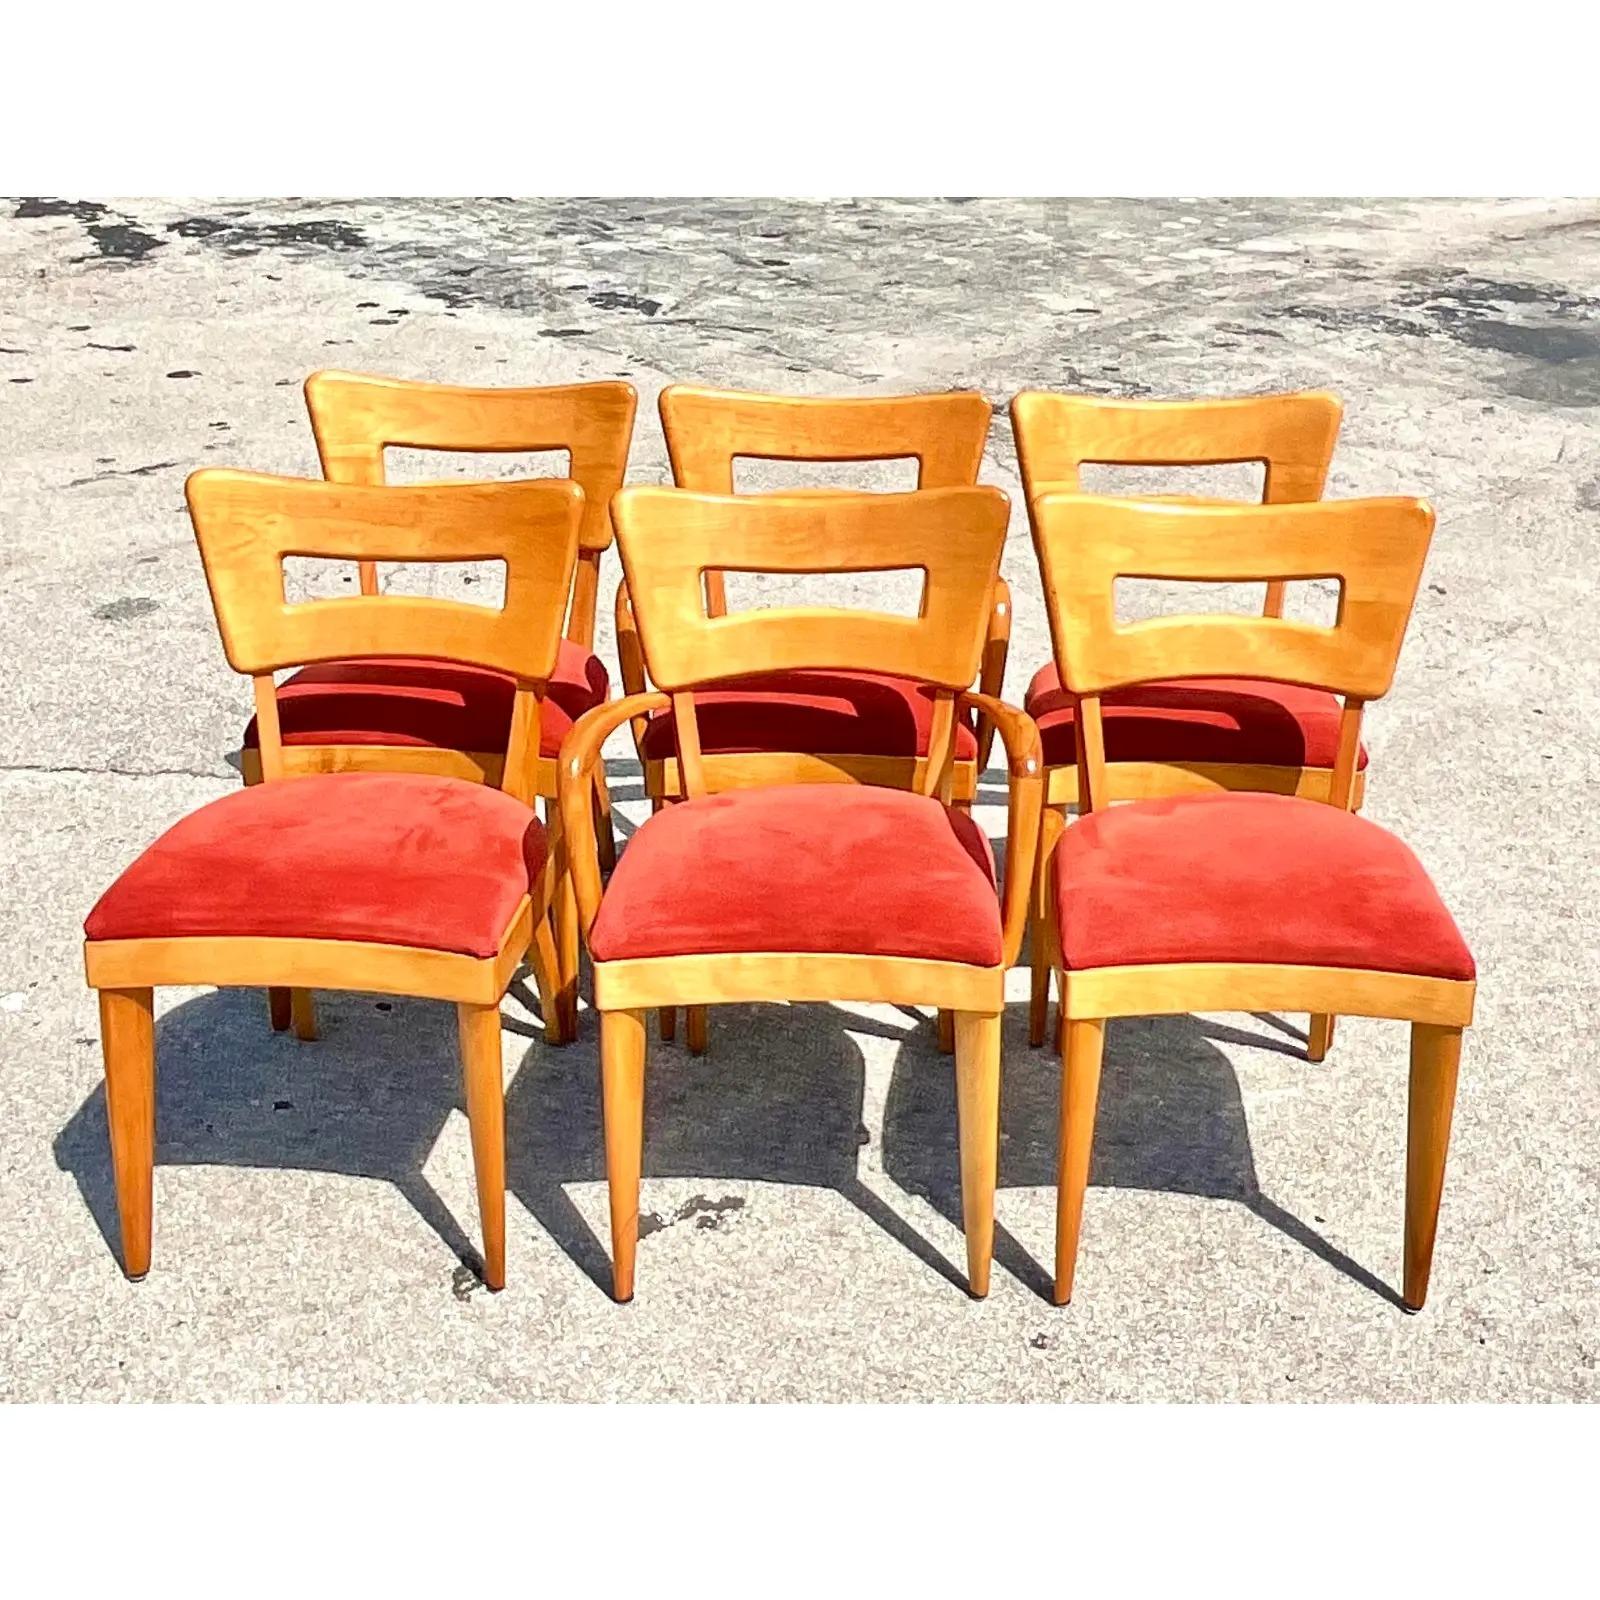 Fantastic set of six vintage MCM dining chairs. Made by the iconic Heywood Wakefield. The coveted Dog Bone design. Two arm chairs and four sides. Acquired from a Palm Beach estate.